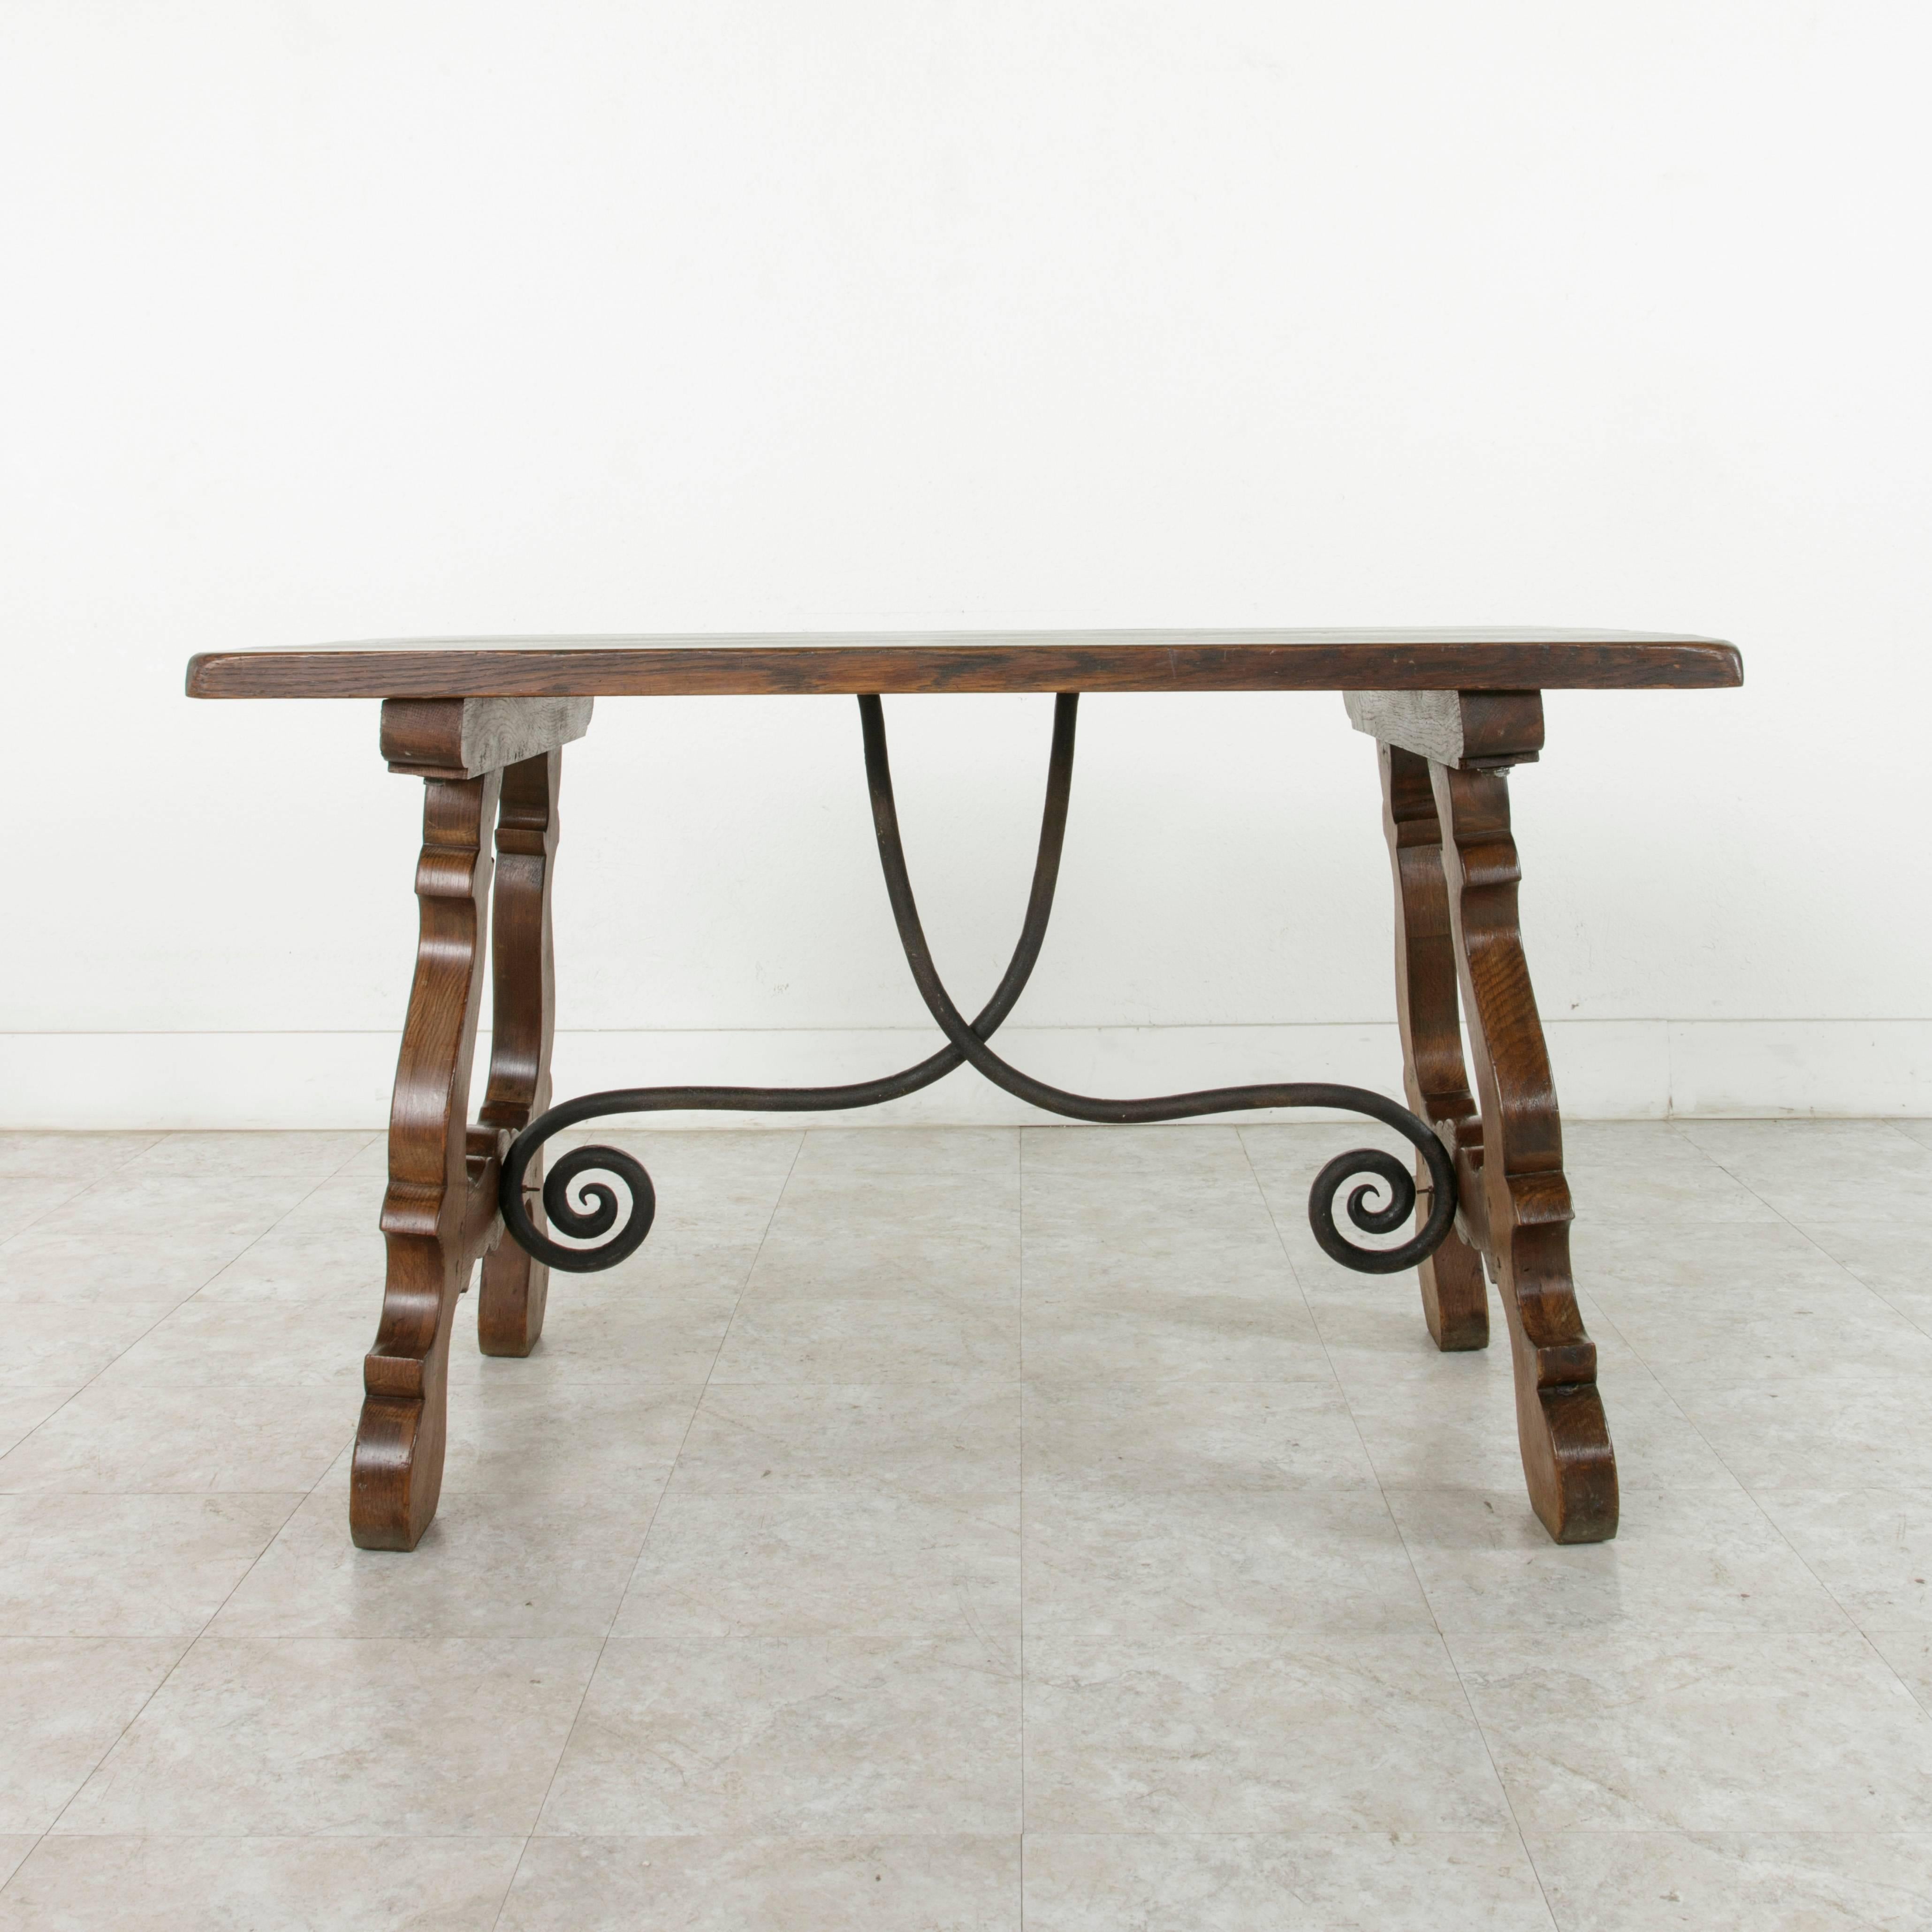 French Early 20th Century Spanish Renaissance Style Table or Desk with Iron Stretcher